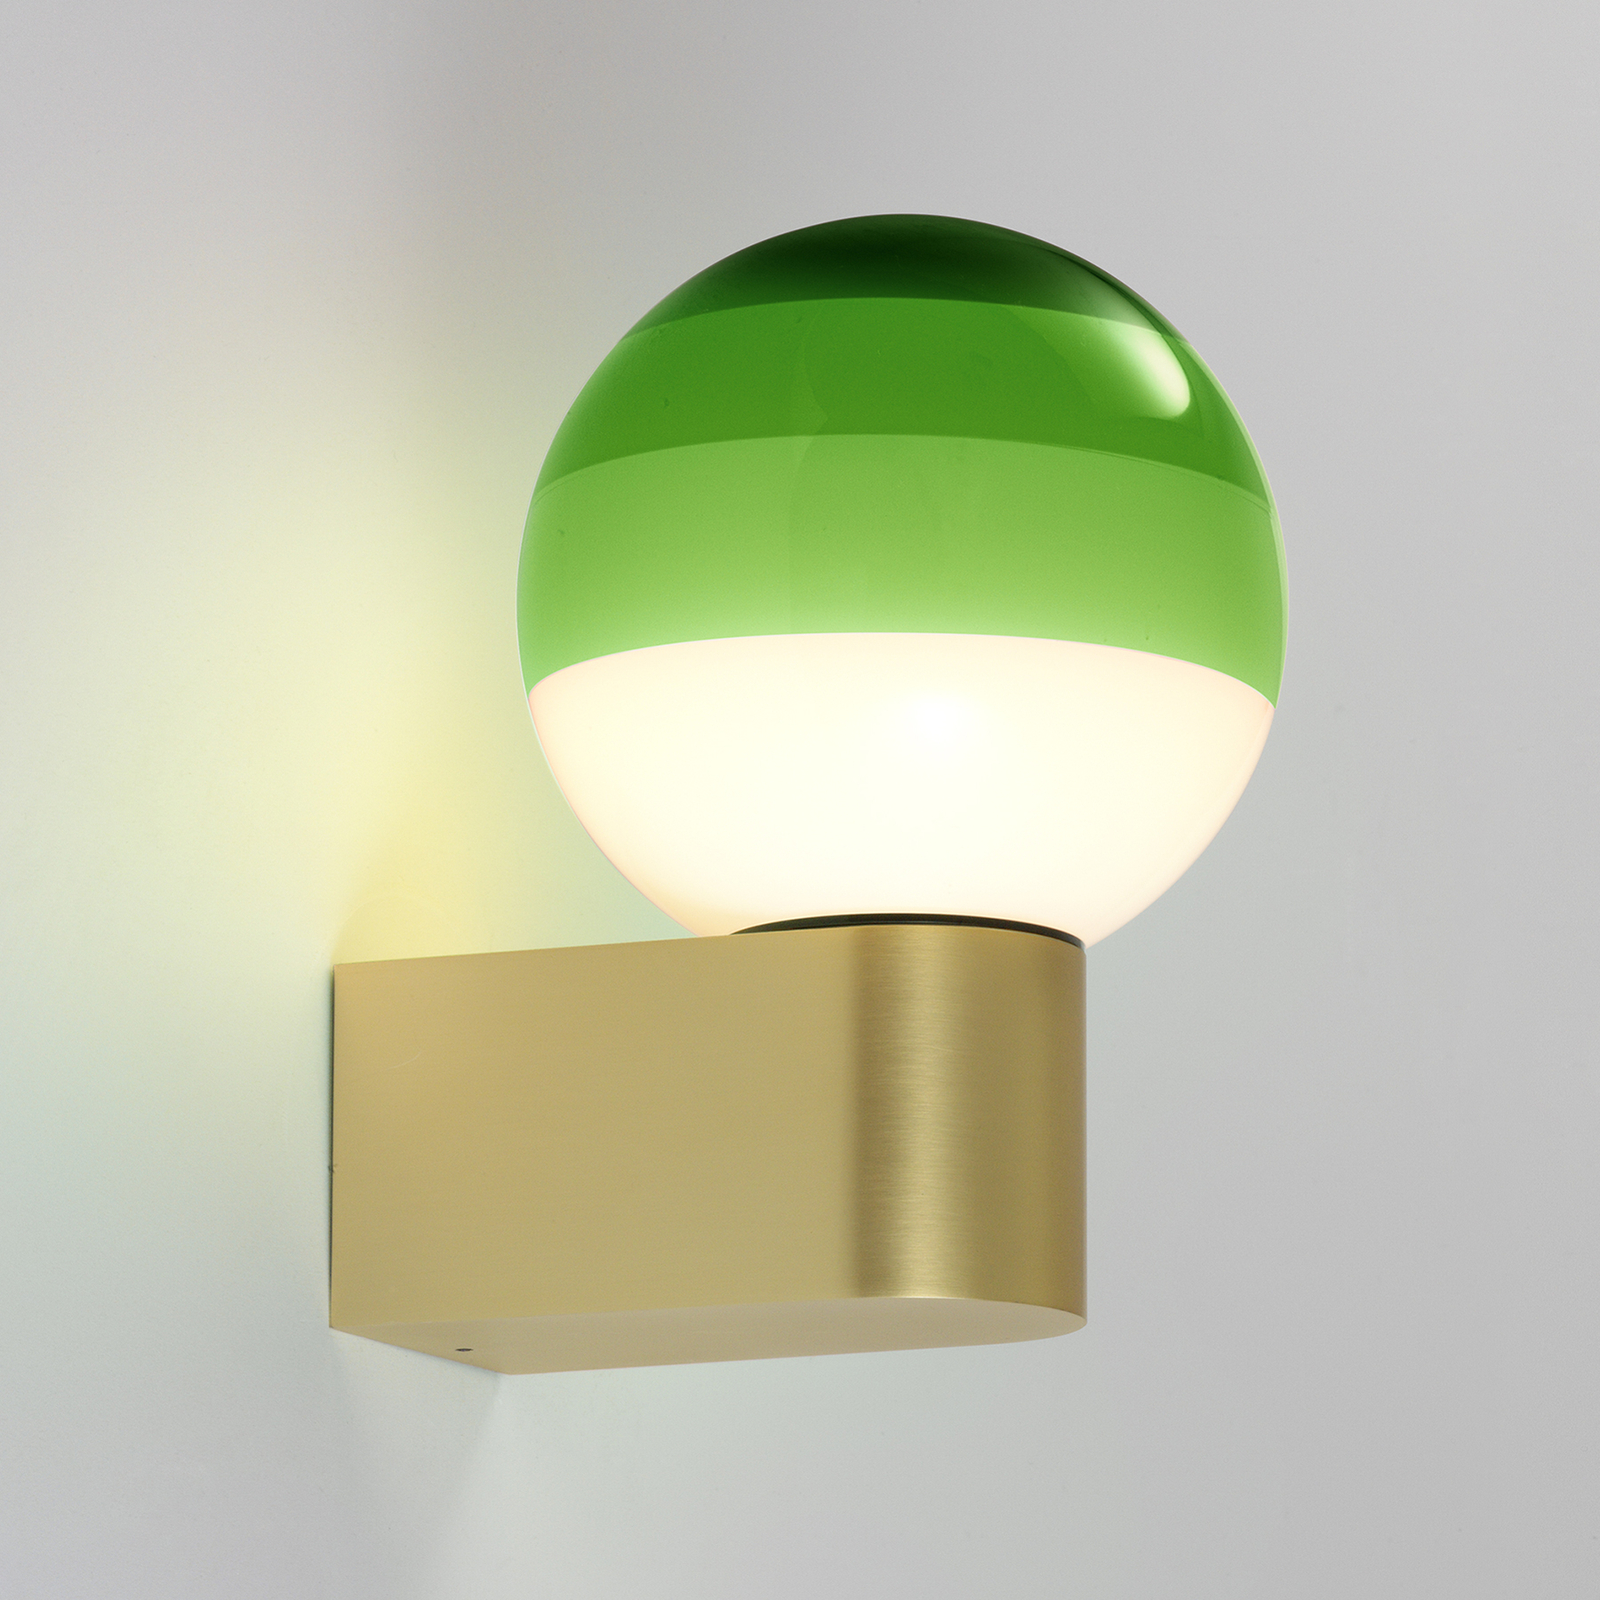 MARSET Dipping Light A1 LED wall lamp, green/gold